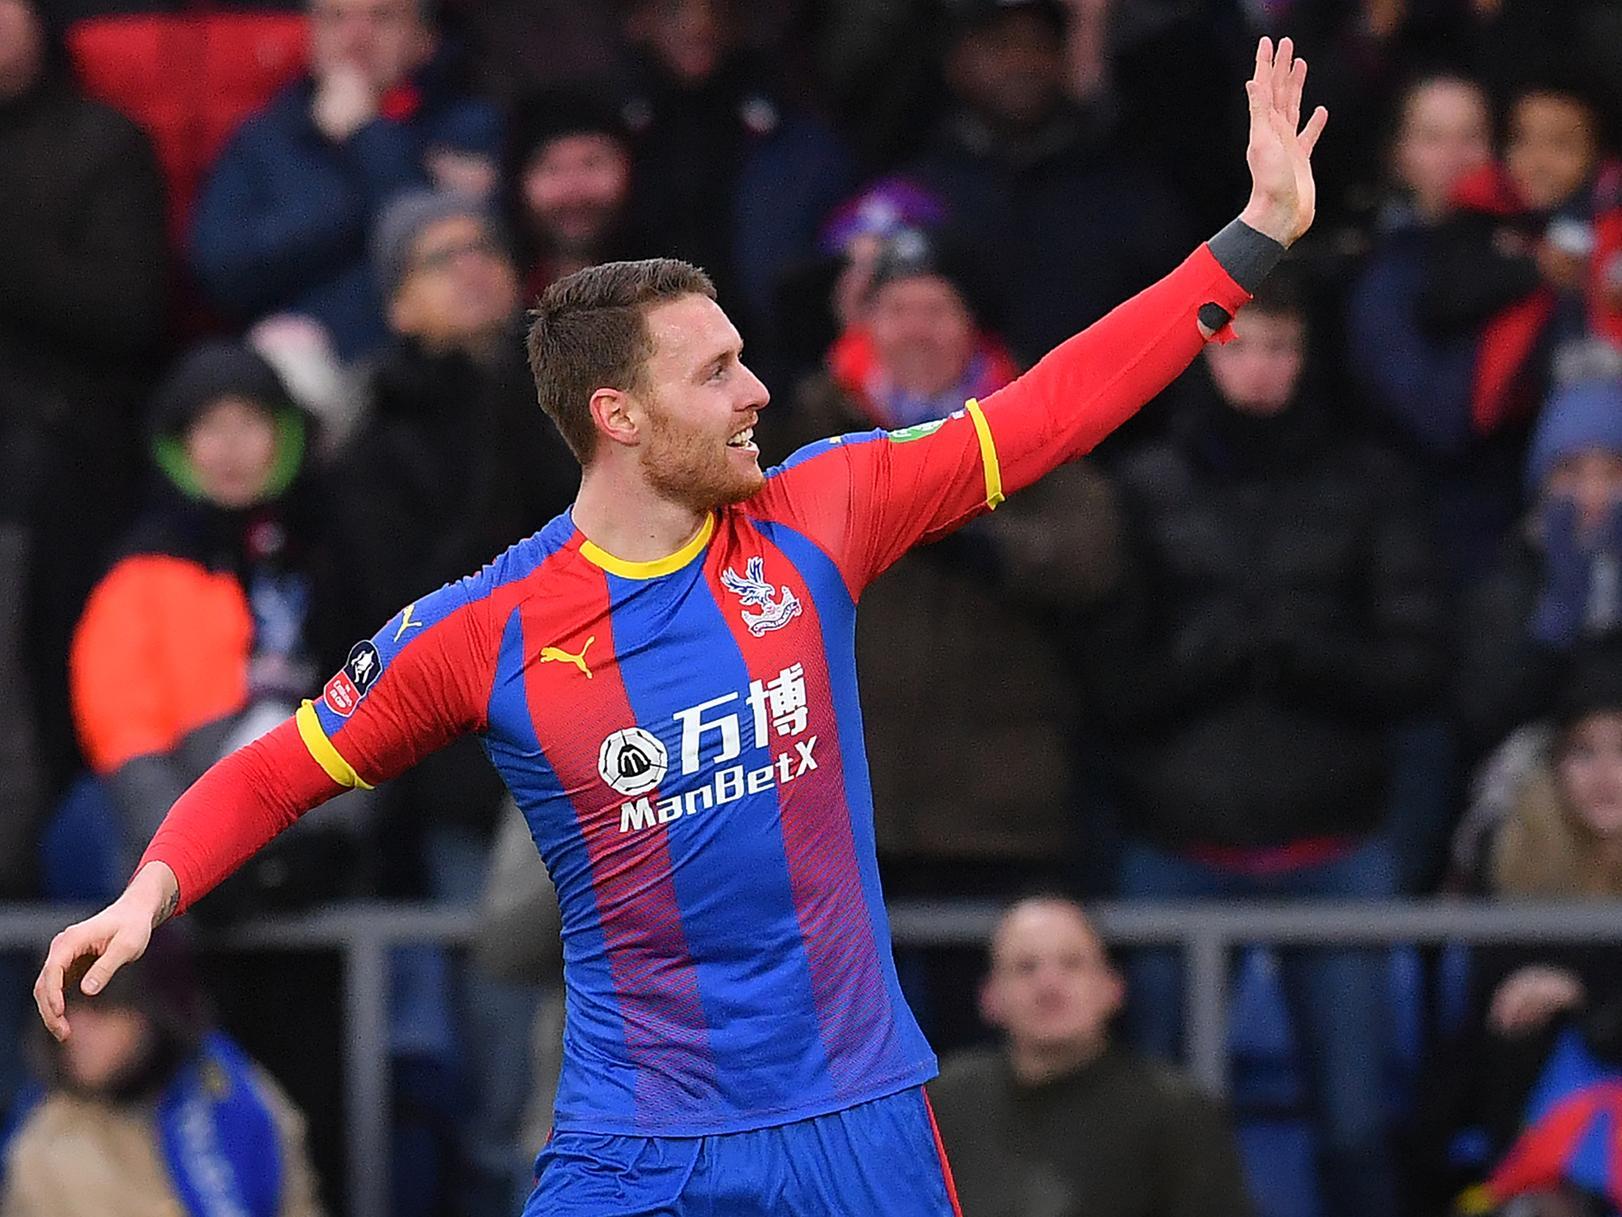 Sheffield Wednesday are rumoured to be in pole position to secure a move for Crystal Palace forward Connor Wickham, after reports emerged suggesting Cardiff City were unlikely to seal the deal. (Wales Online)